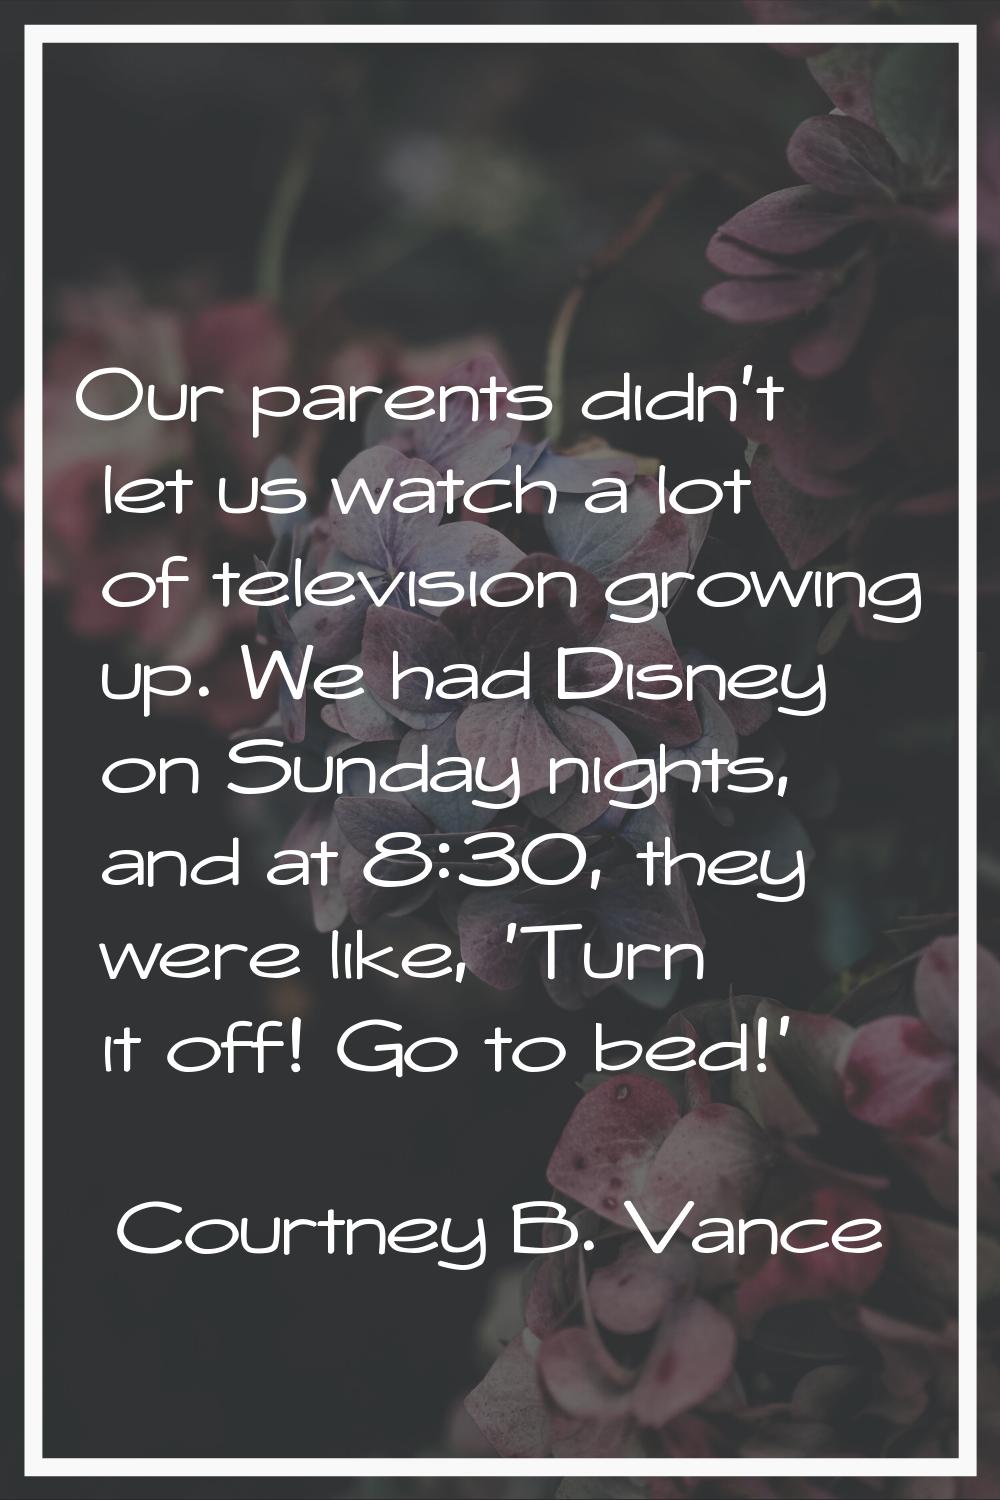 Our parents didn't let us watch a lot of television growing up. We had Disney on Sunday nights, and